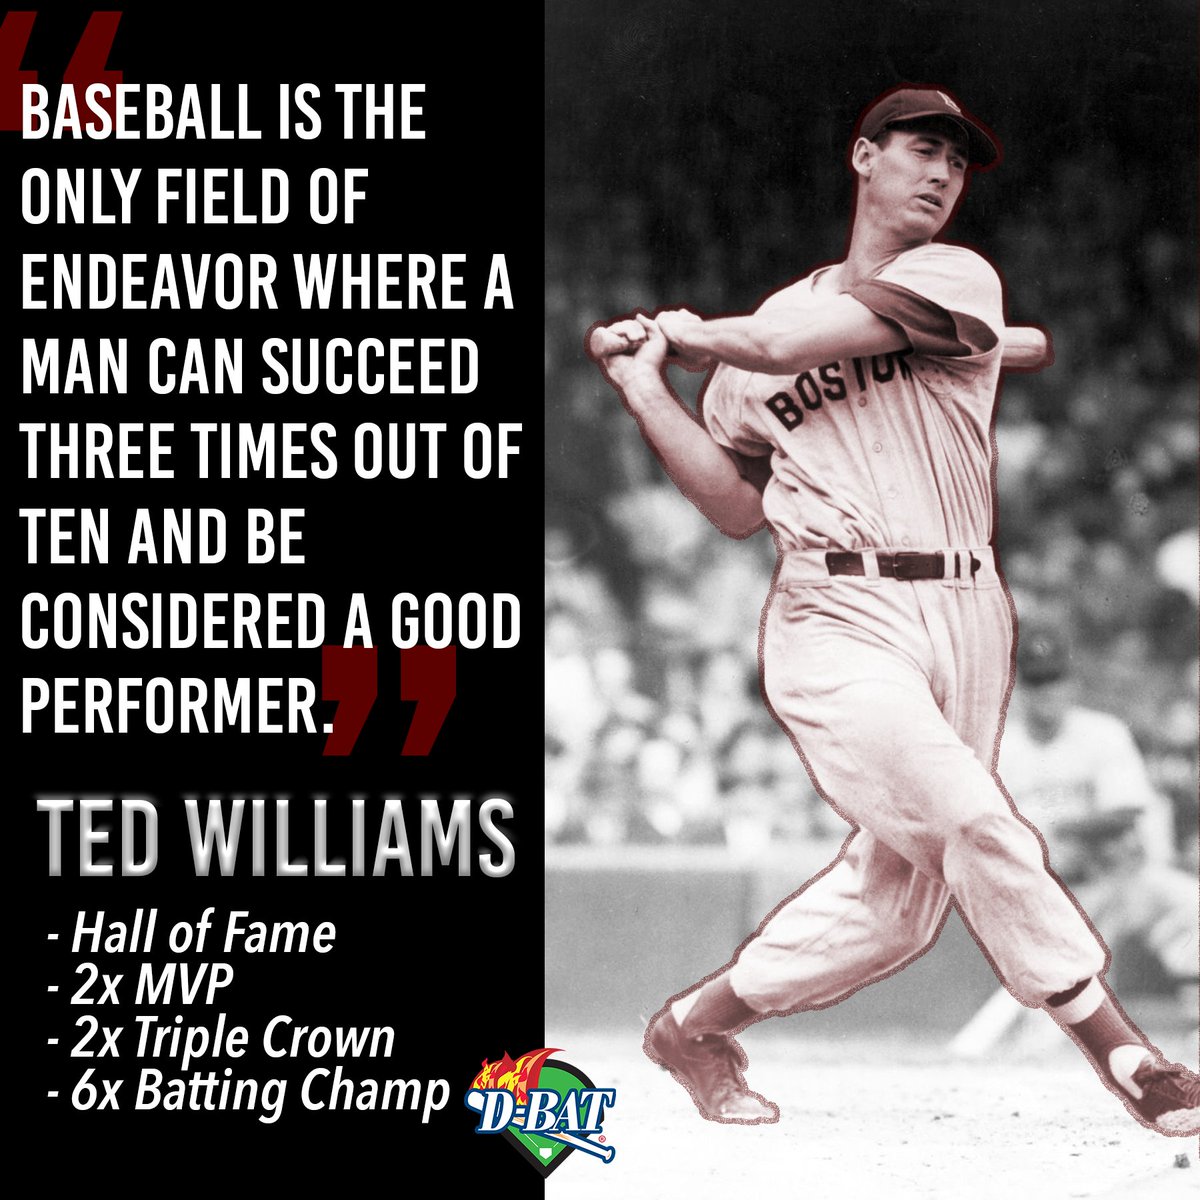 3 for 10 at the plate ain't bad at all👀 #MondayMotivation #TedWilliams #BetterThanYesterday